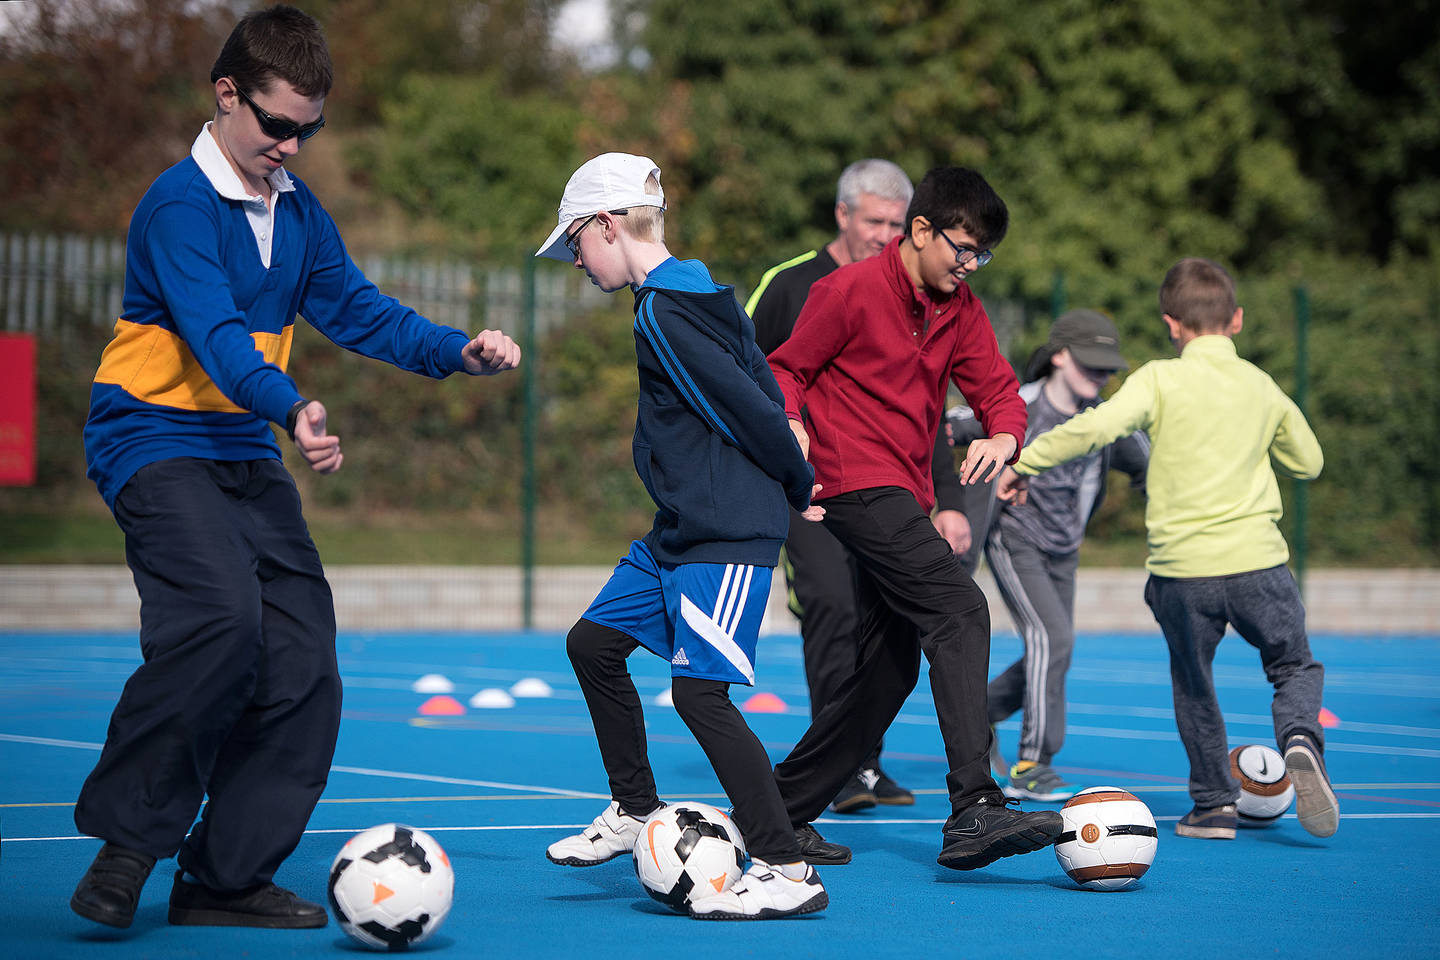 Children with visual impairments playing football 